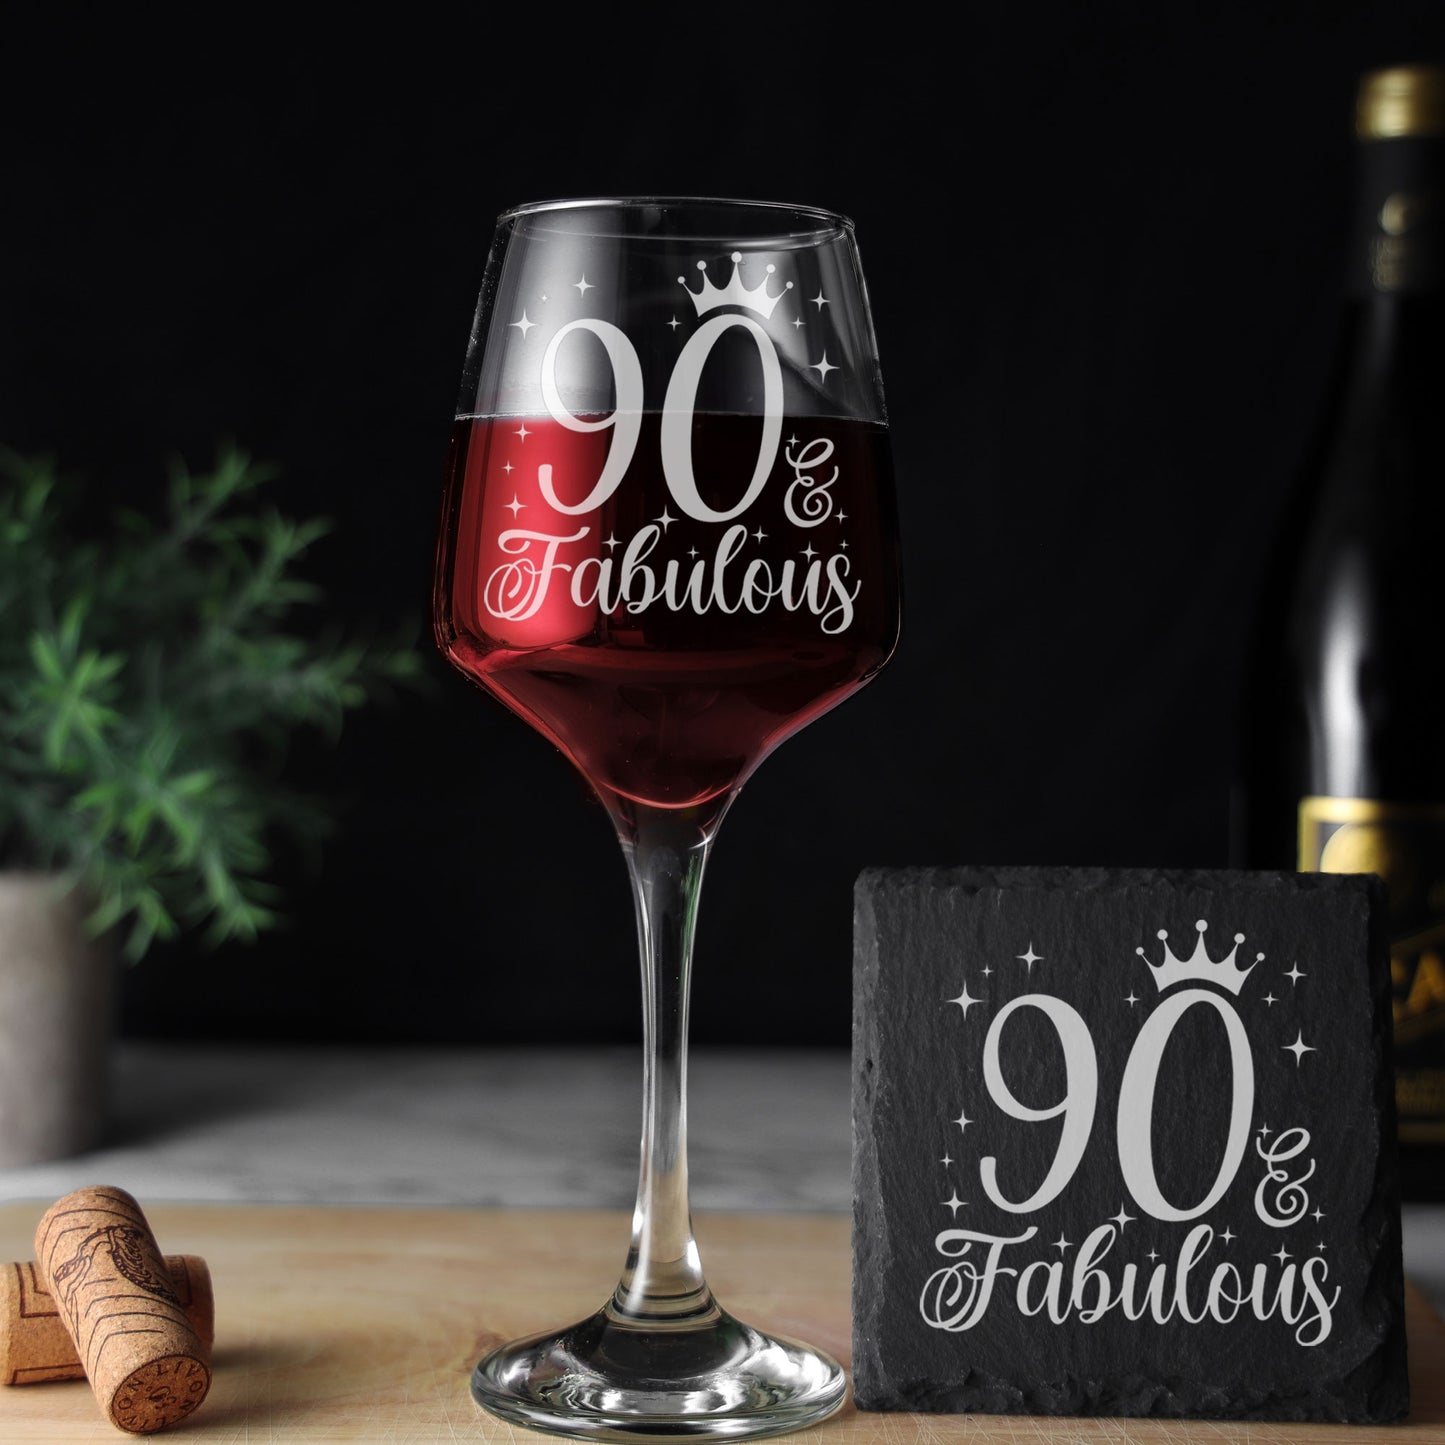 90 & Fabulous 90th Birthday Gift Engraved Wine Glass and/or Coaster Set  - Always Looking Good - Glass & Square Coaster  